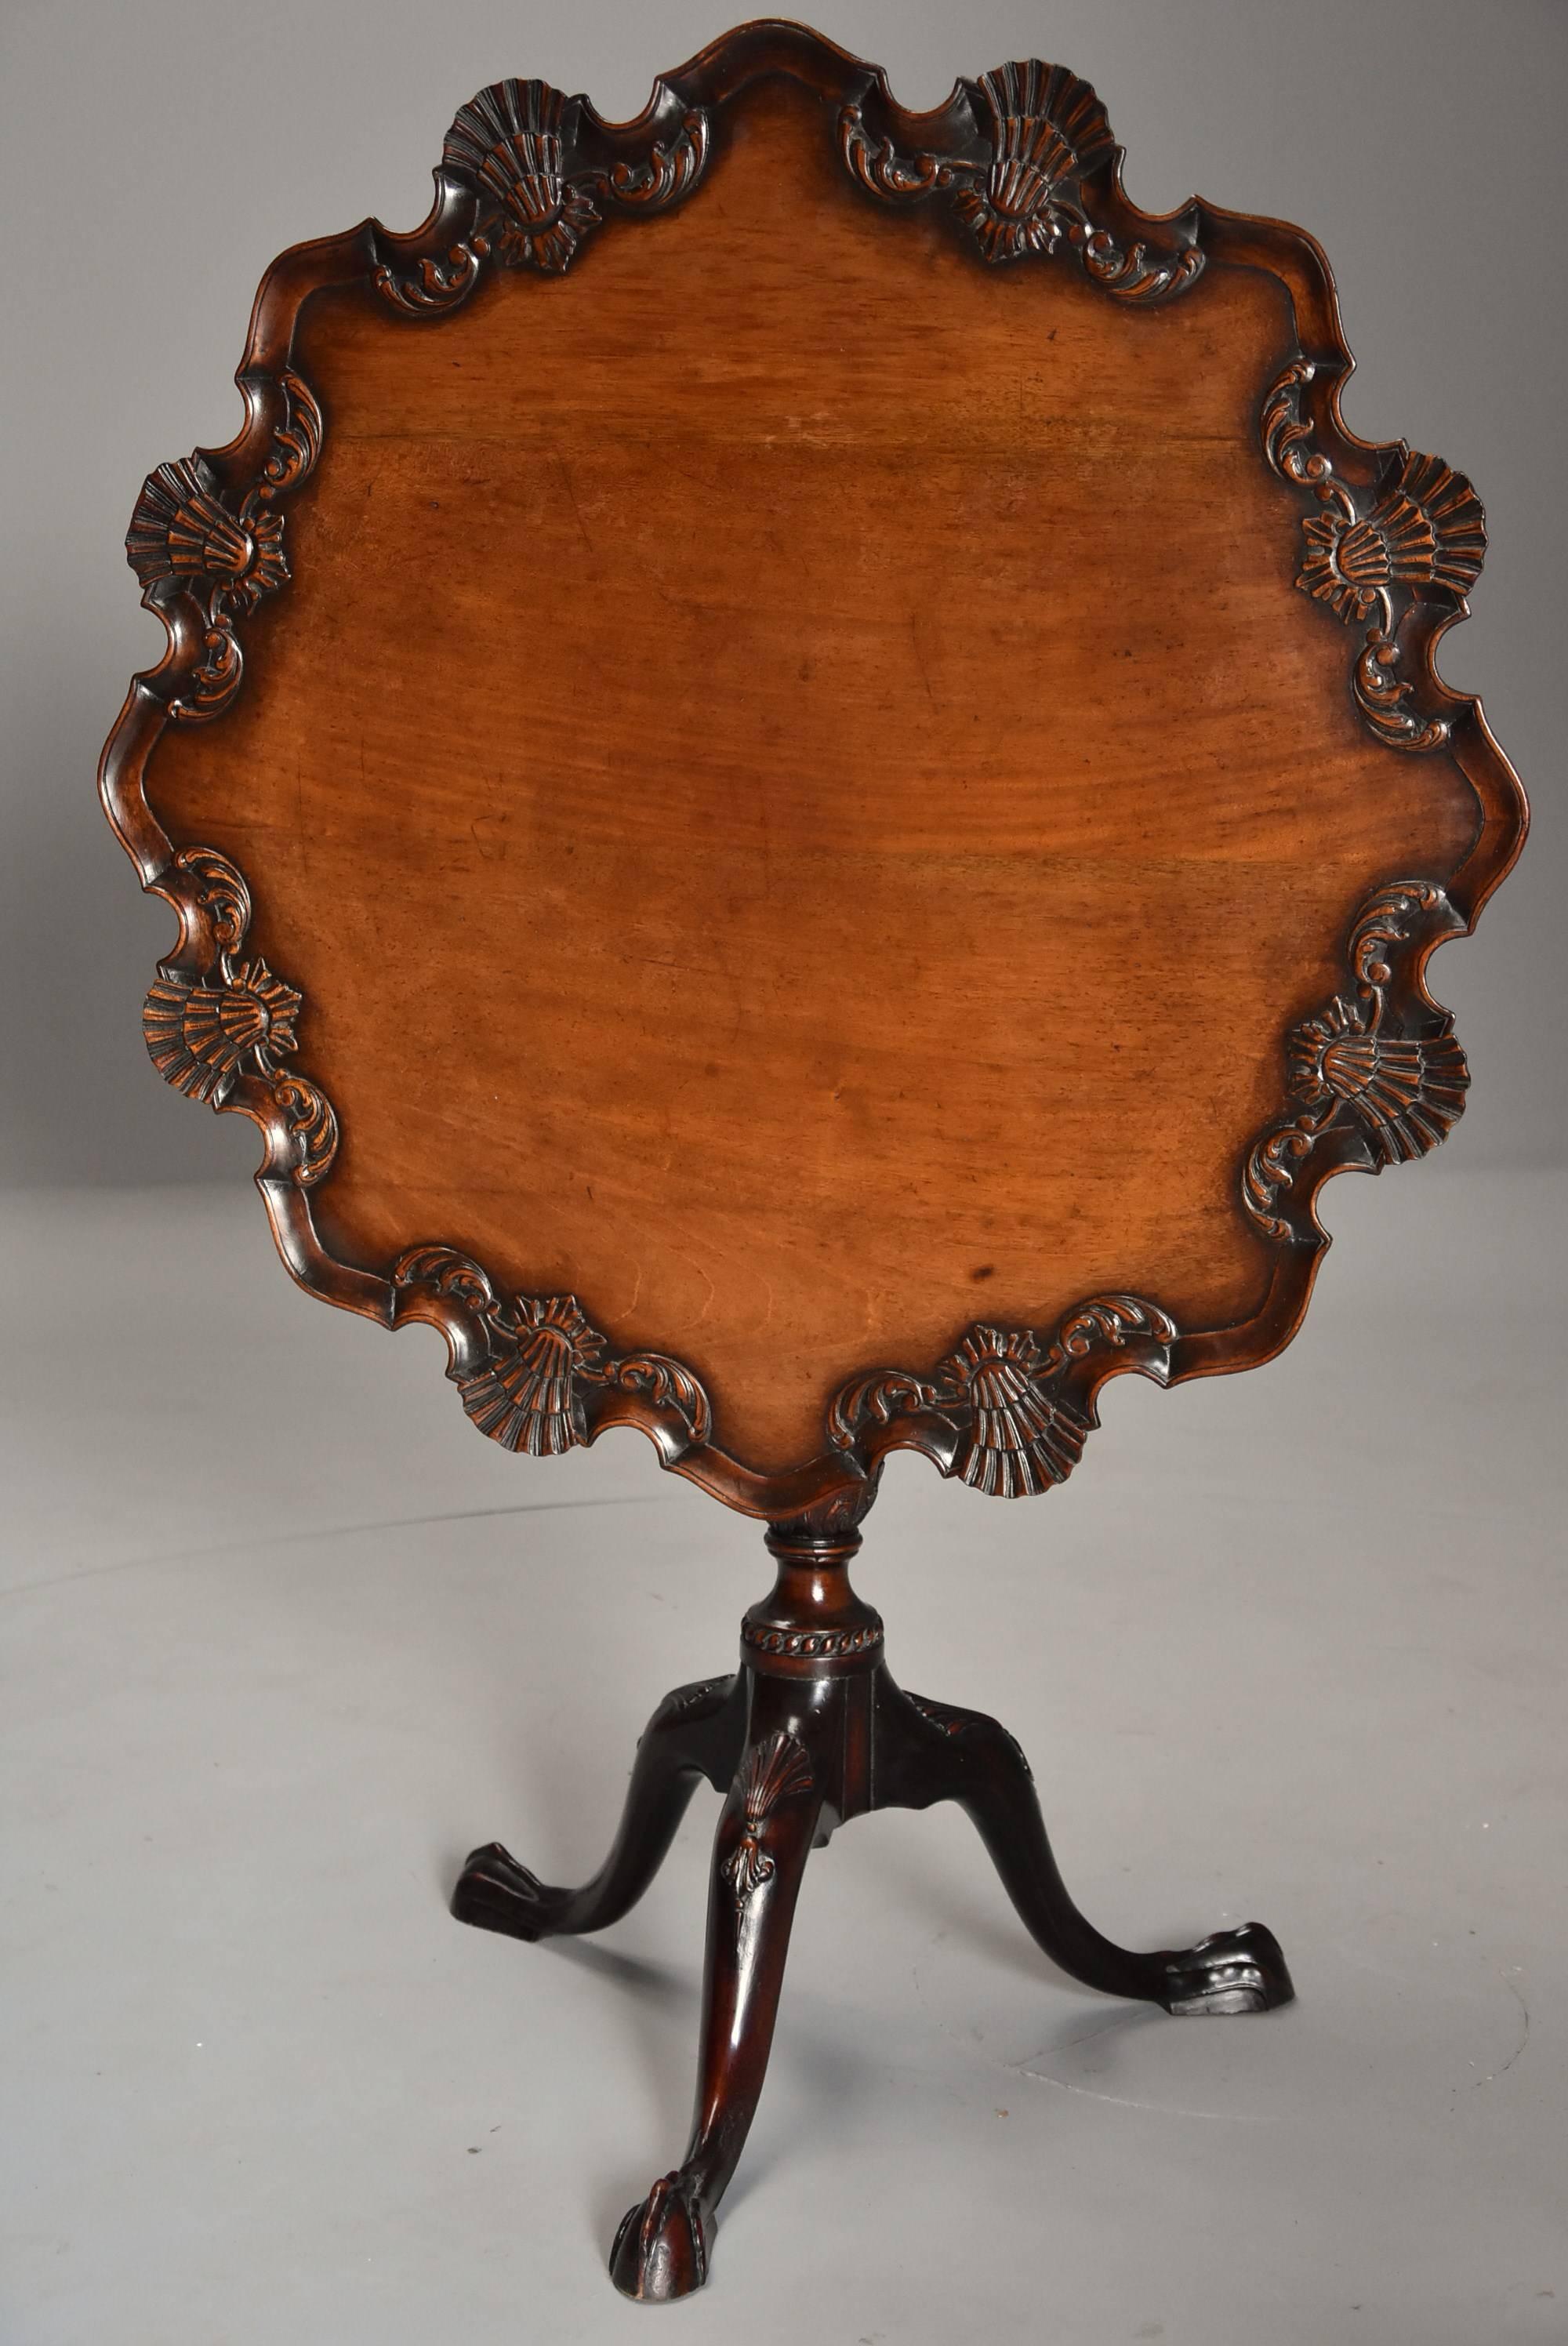 A late 19th century superb quality Chippendale style mahogany piecrust tilt top tea table with tripod base.

This table consists of a mahogany top of good patina (color) with applied scallop shell and foliate carved decoration with applied